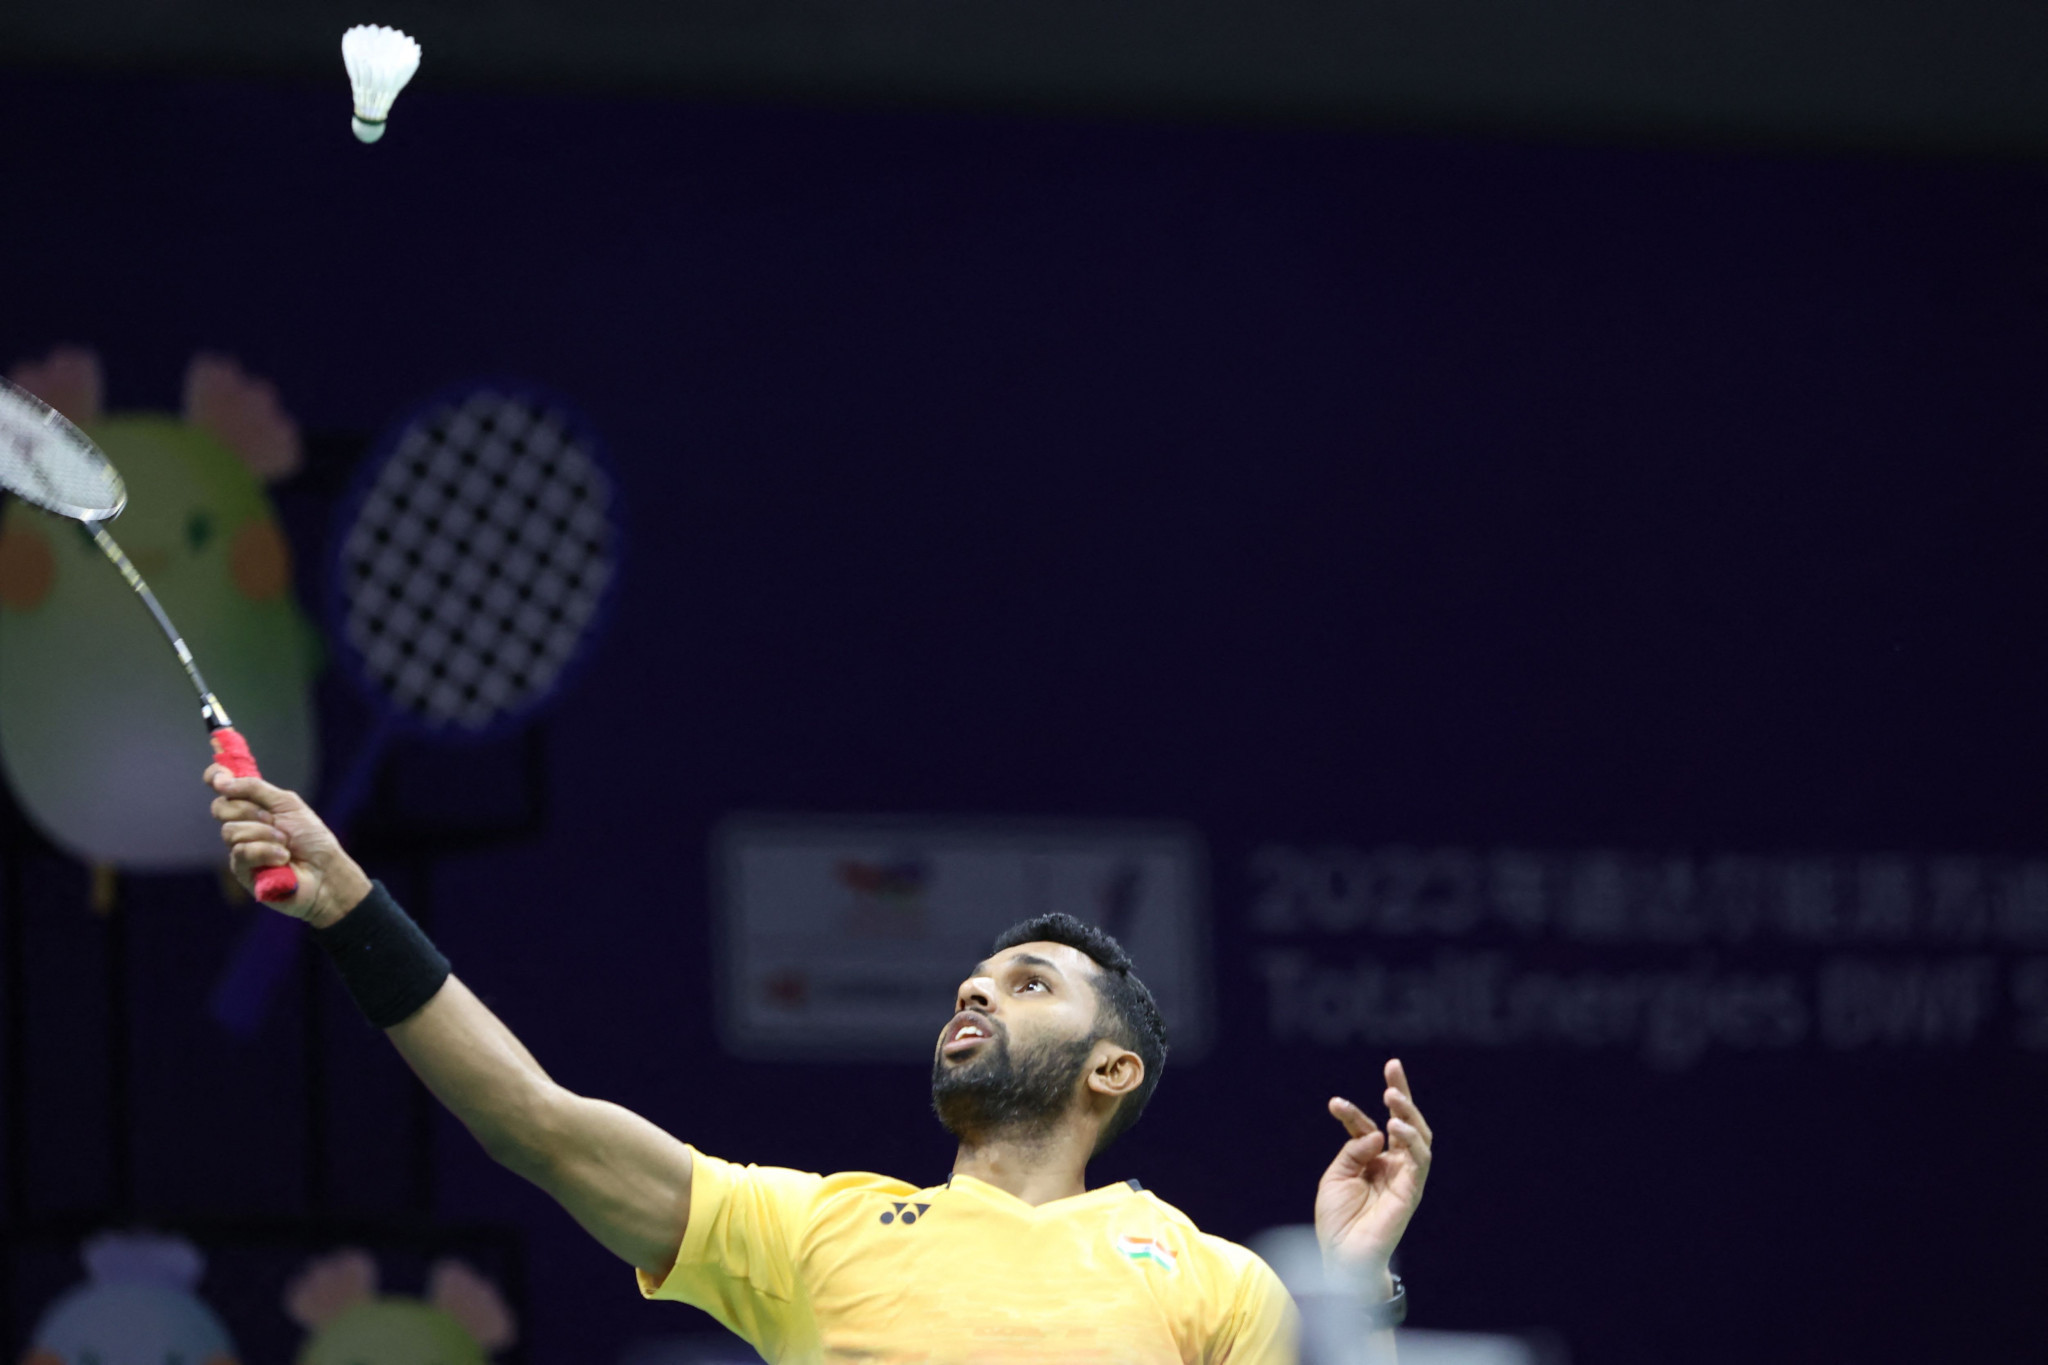 Thomas Cup winner HS Prannoy was part of India's team at the Sudirman Cup, but they were beaten by Malaysia and Chinese Taipei ©Getty Images